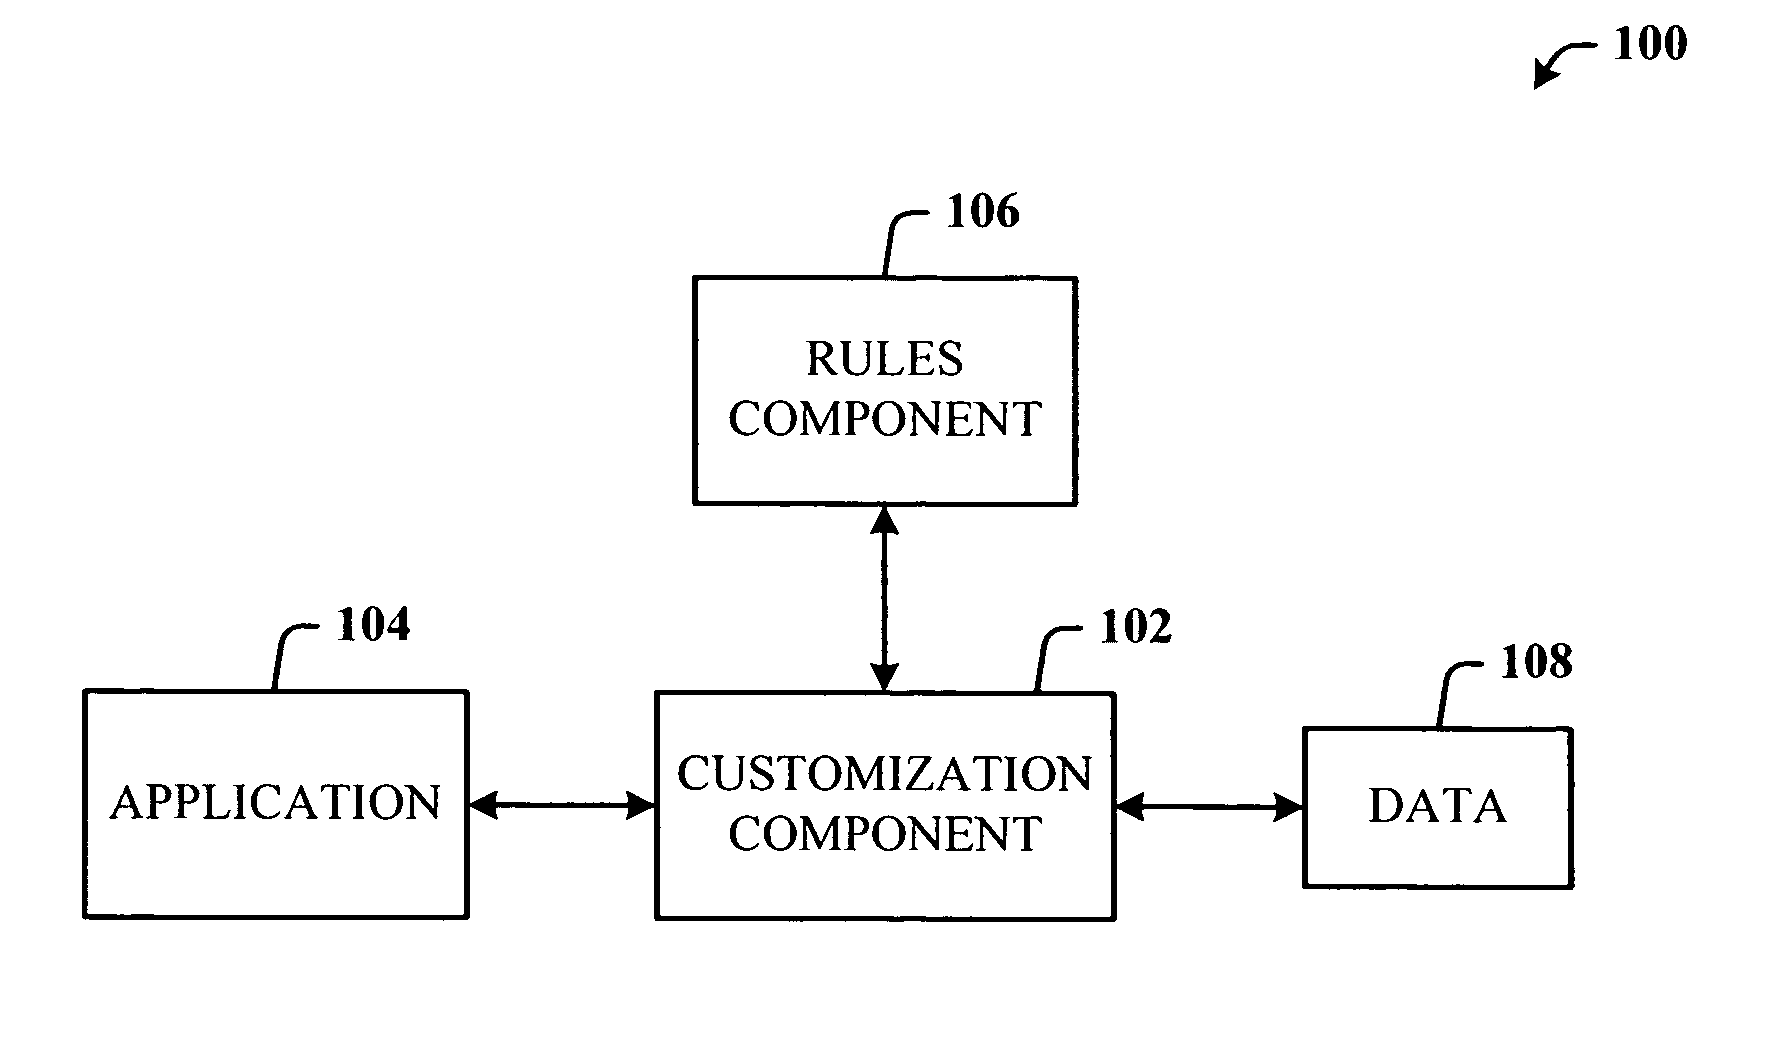 End-user application customization using rules